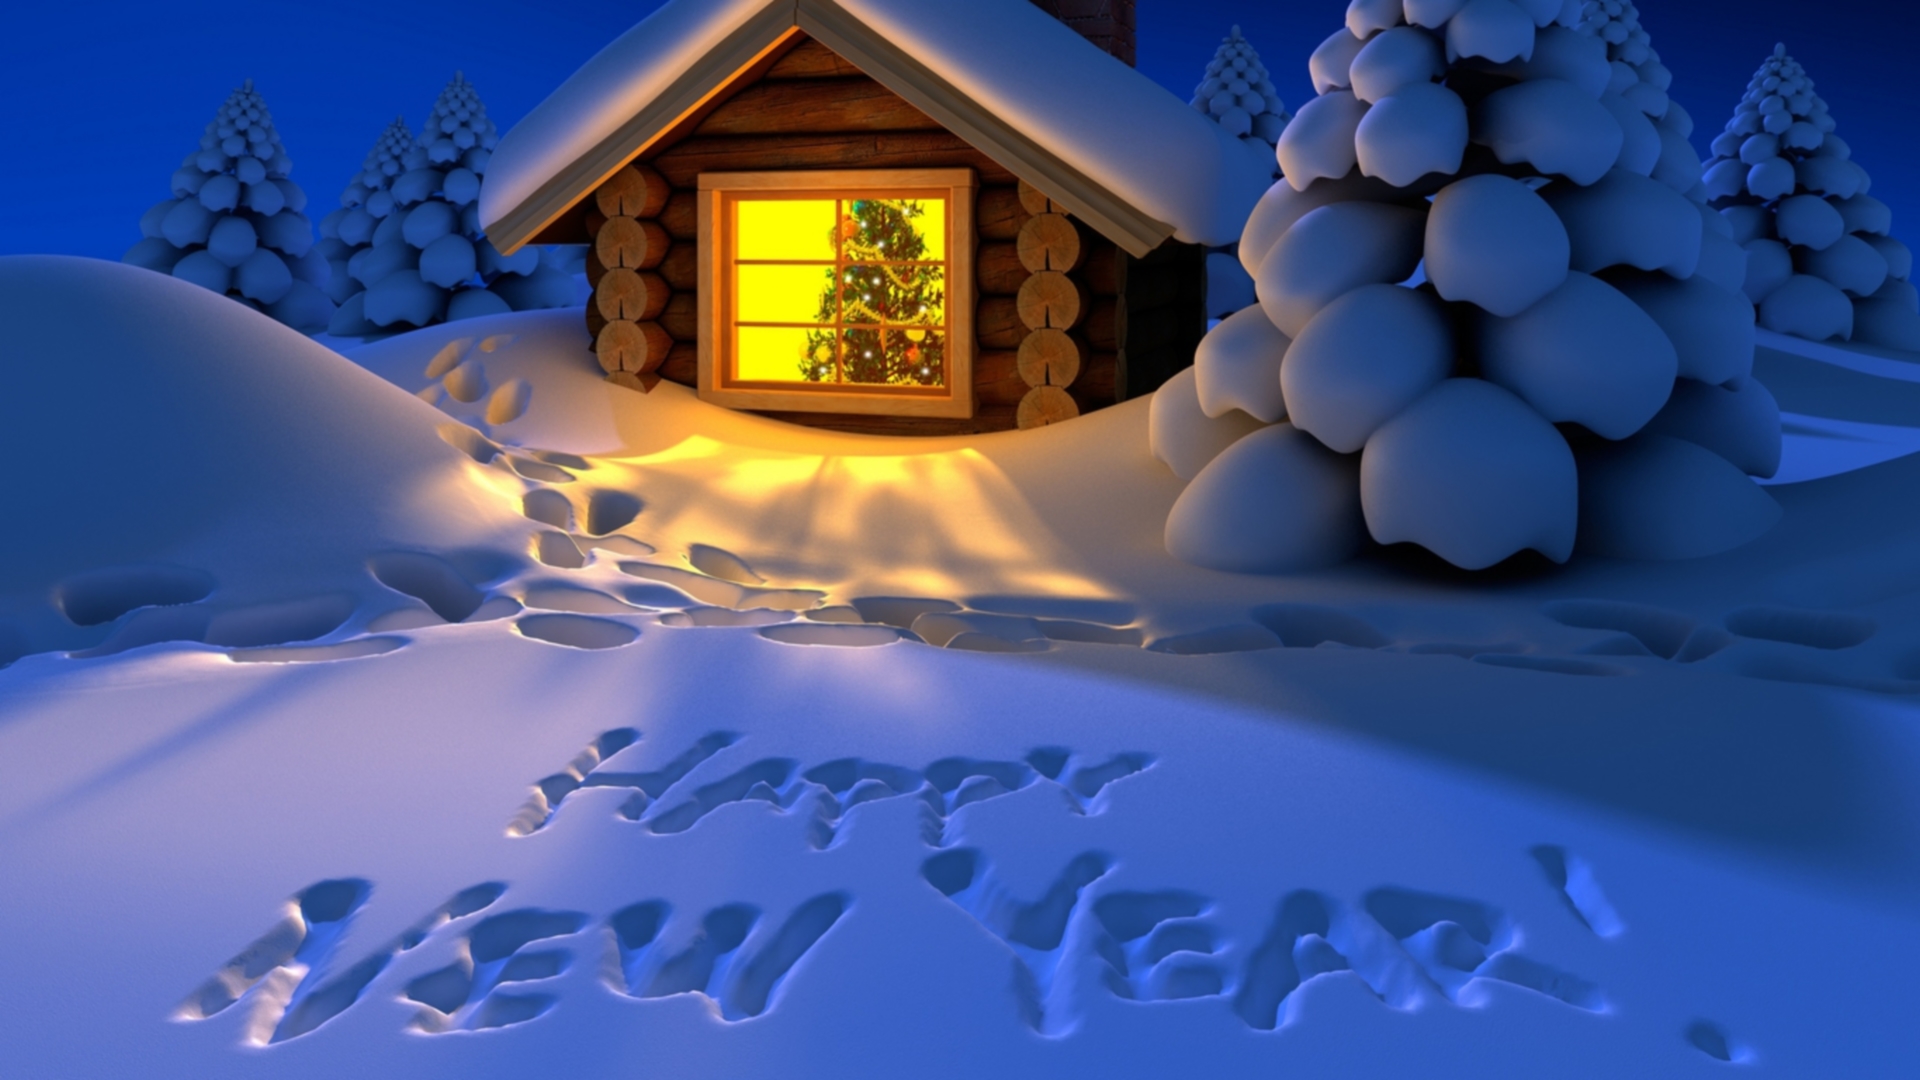 New Year Wallpaper Image Photos Pictures Pics Full